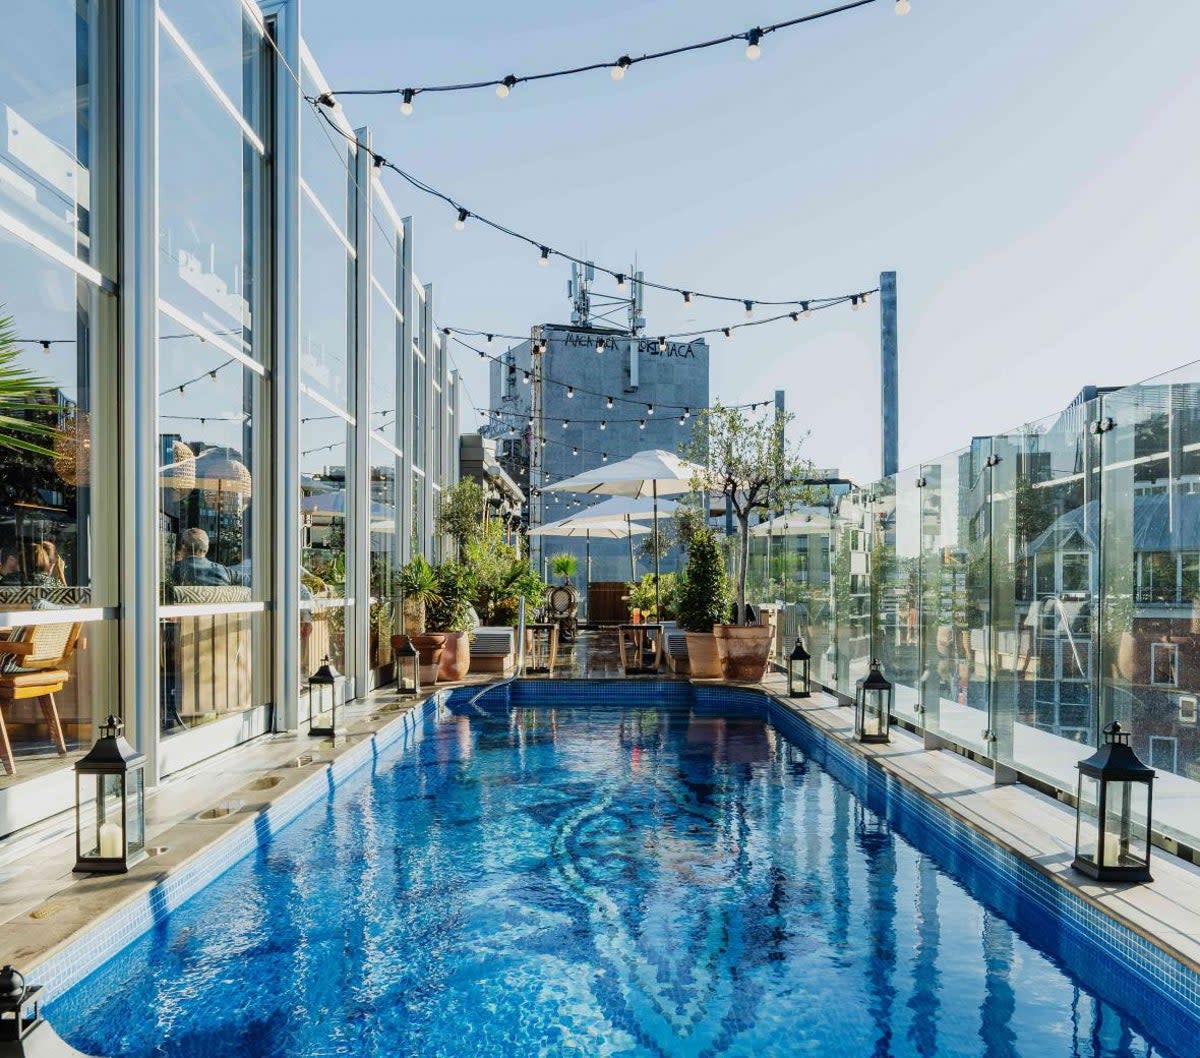 Dive in The rooftop pool at The Mondrian will become part of the club (Mondrian Shoreditch)